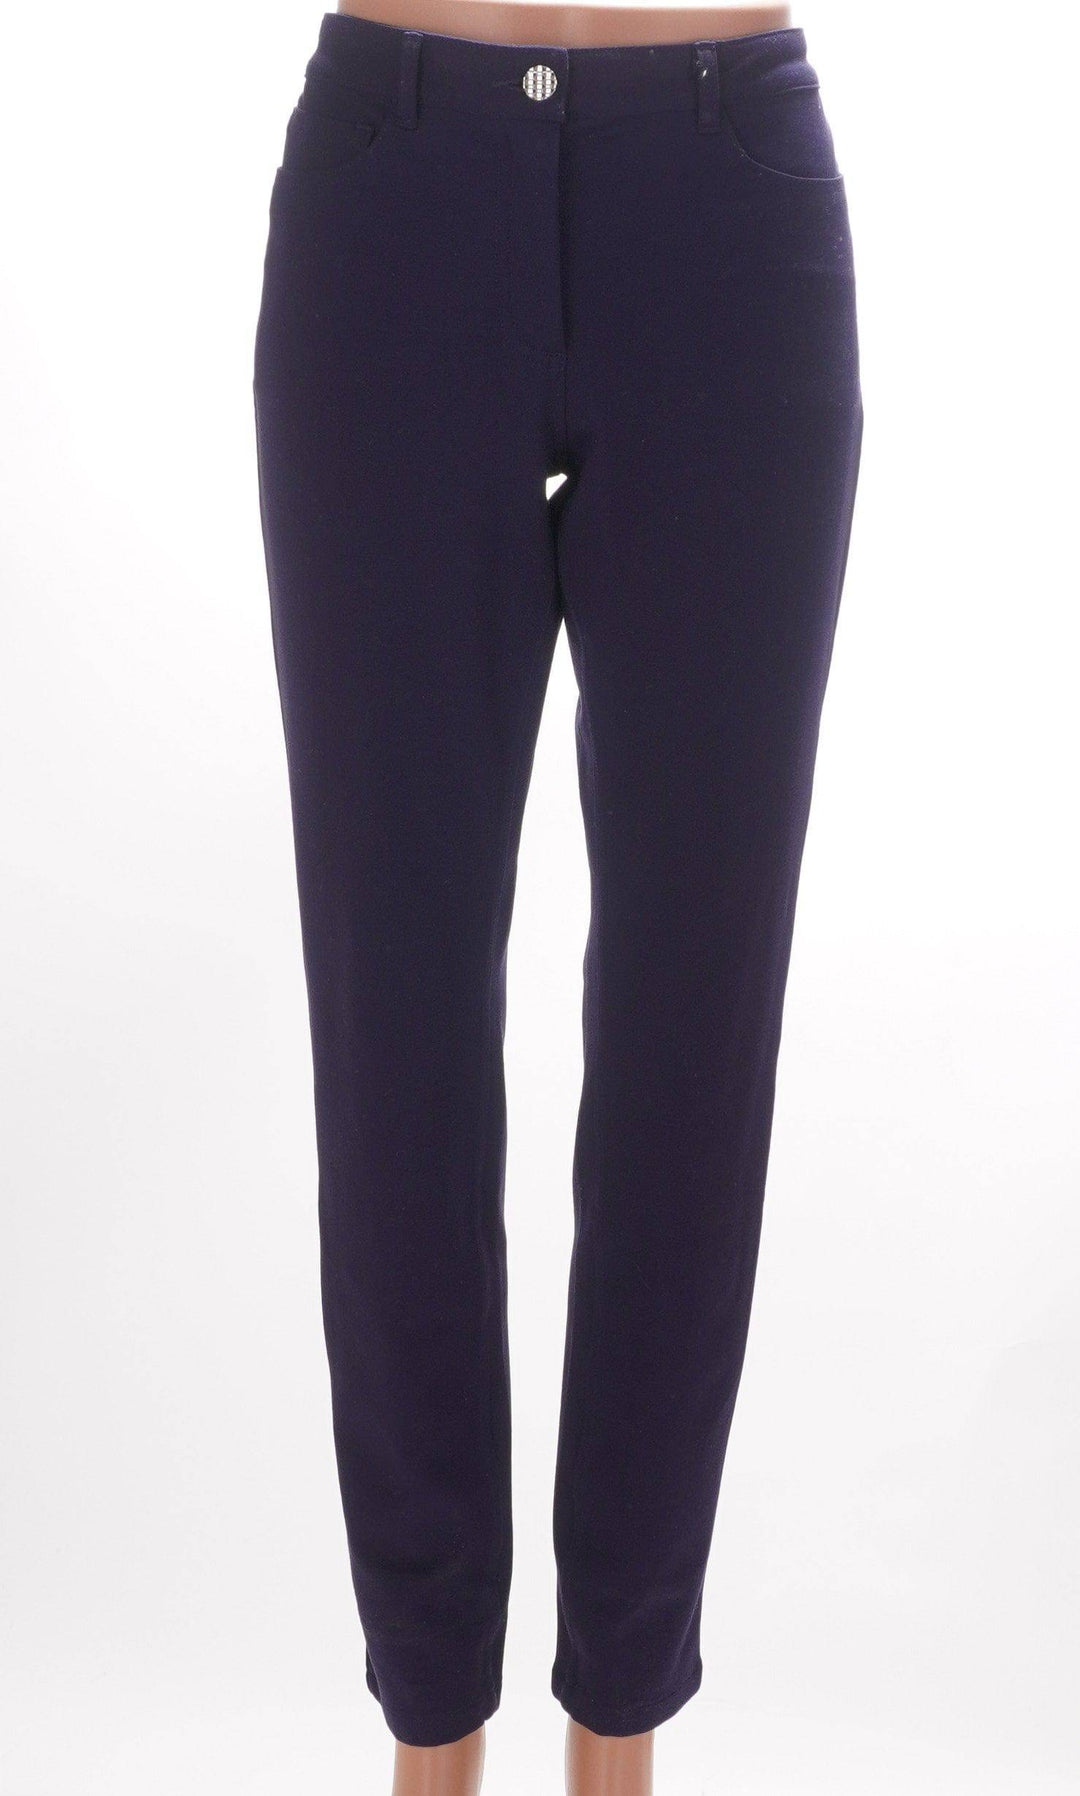 Movetes Navy Blue / 6 / Consigned Movetes Pant - Navy Blue - Size 6